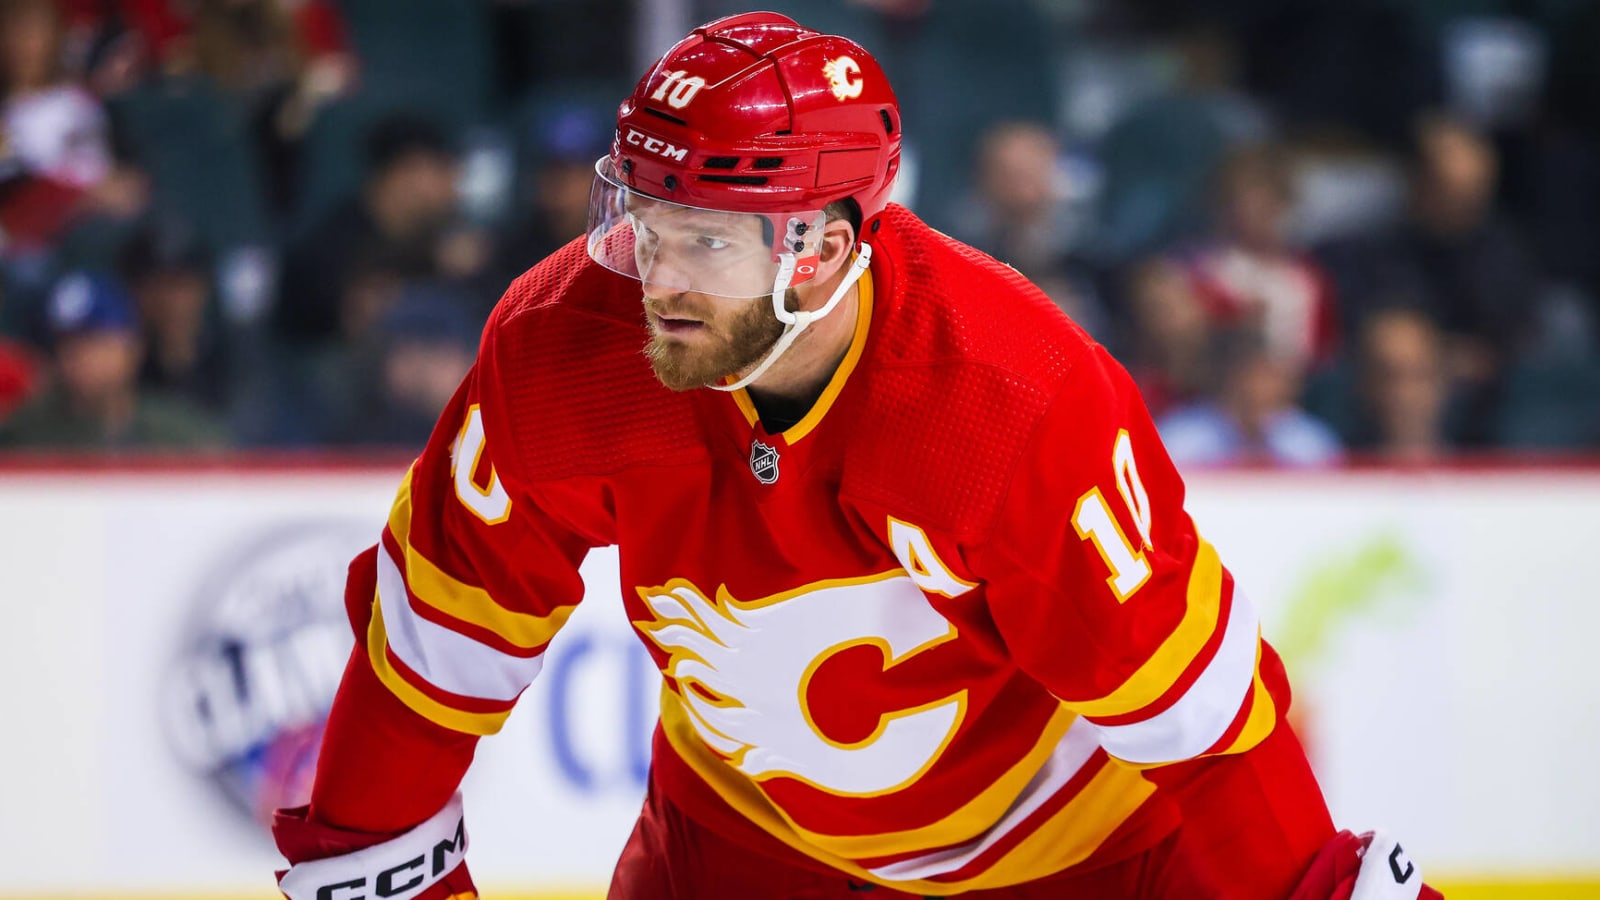 After benching, Flames' Jonathan Huberdeau is in a very big rut